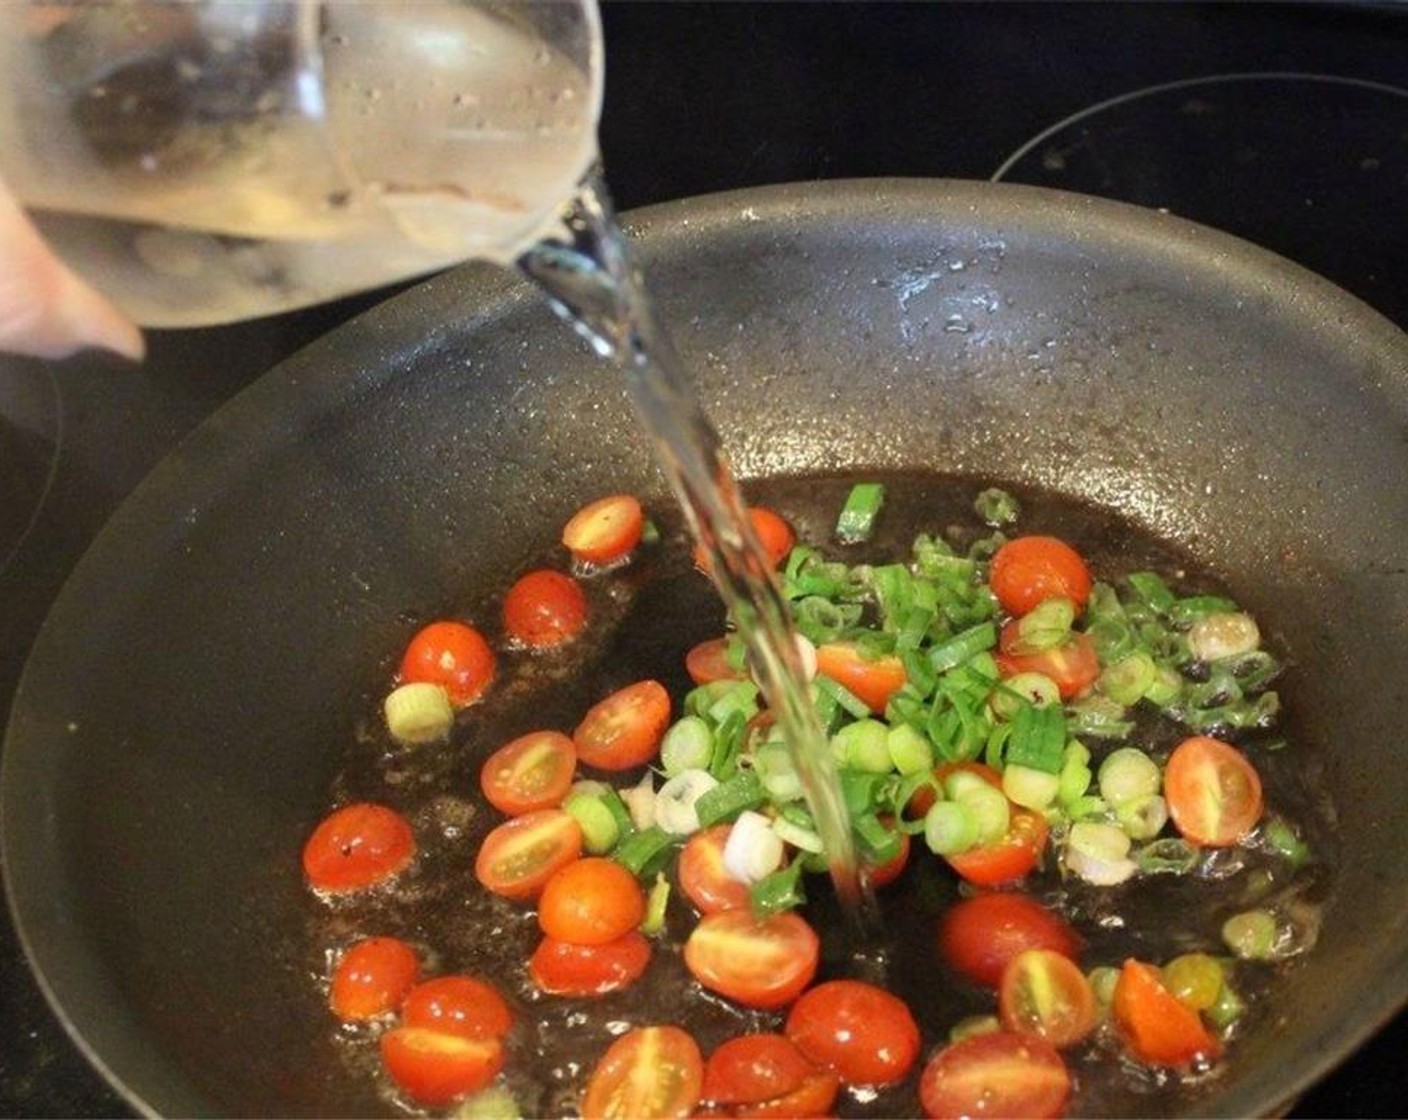 step 8 In the hot pan, add the scallion, tomatoes, and White Wine (1 cup).